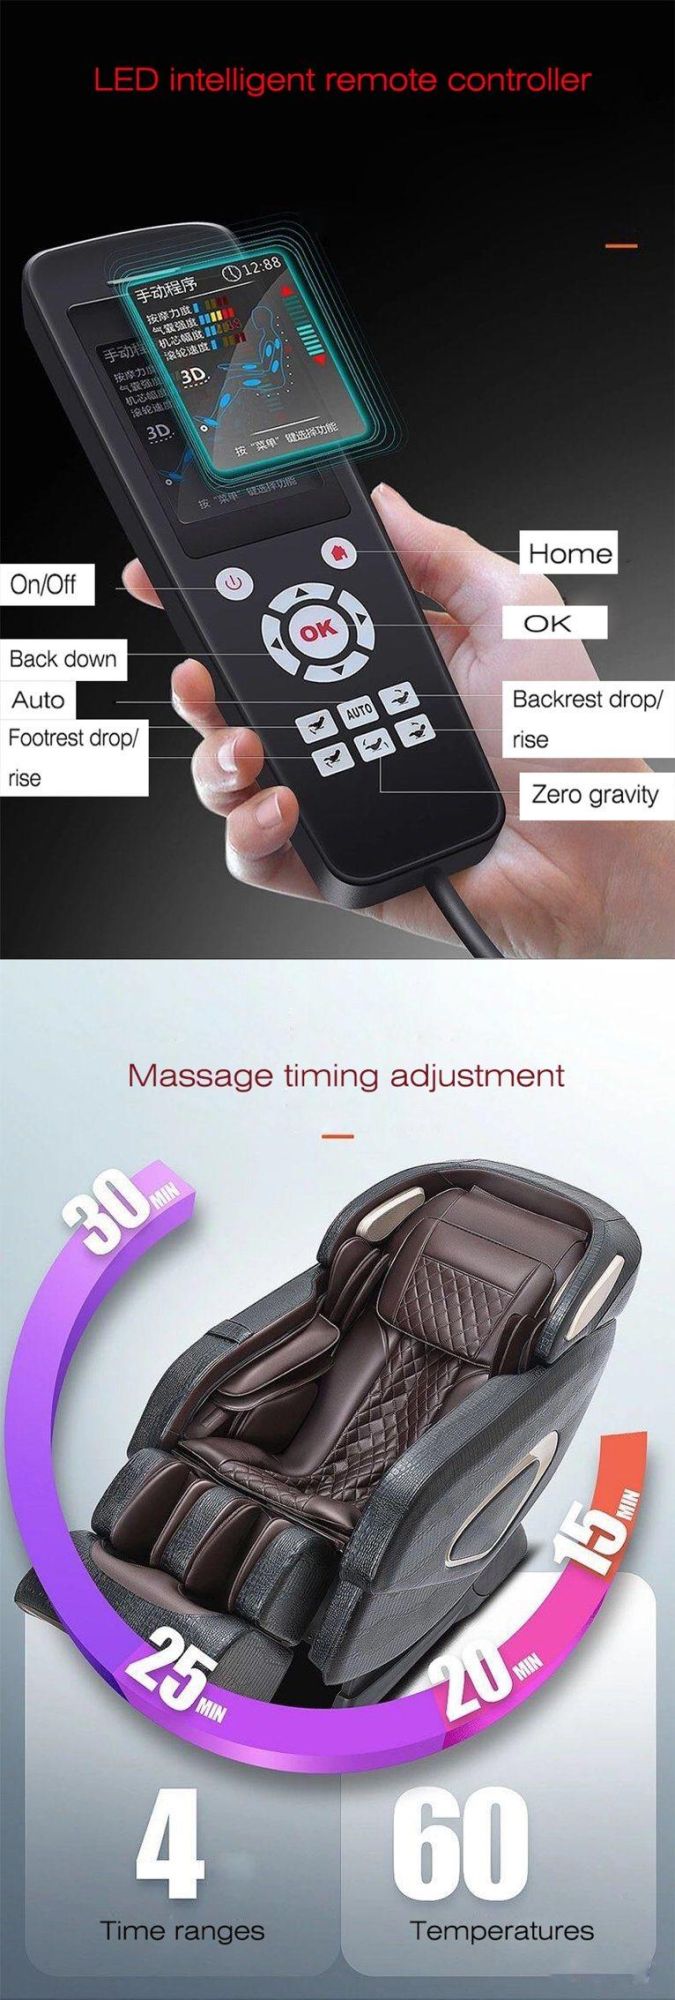 Electric Intelligent Full Body Massage Chair with Multi-Function 3D Zero Gravity